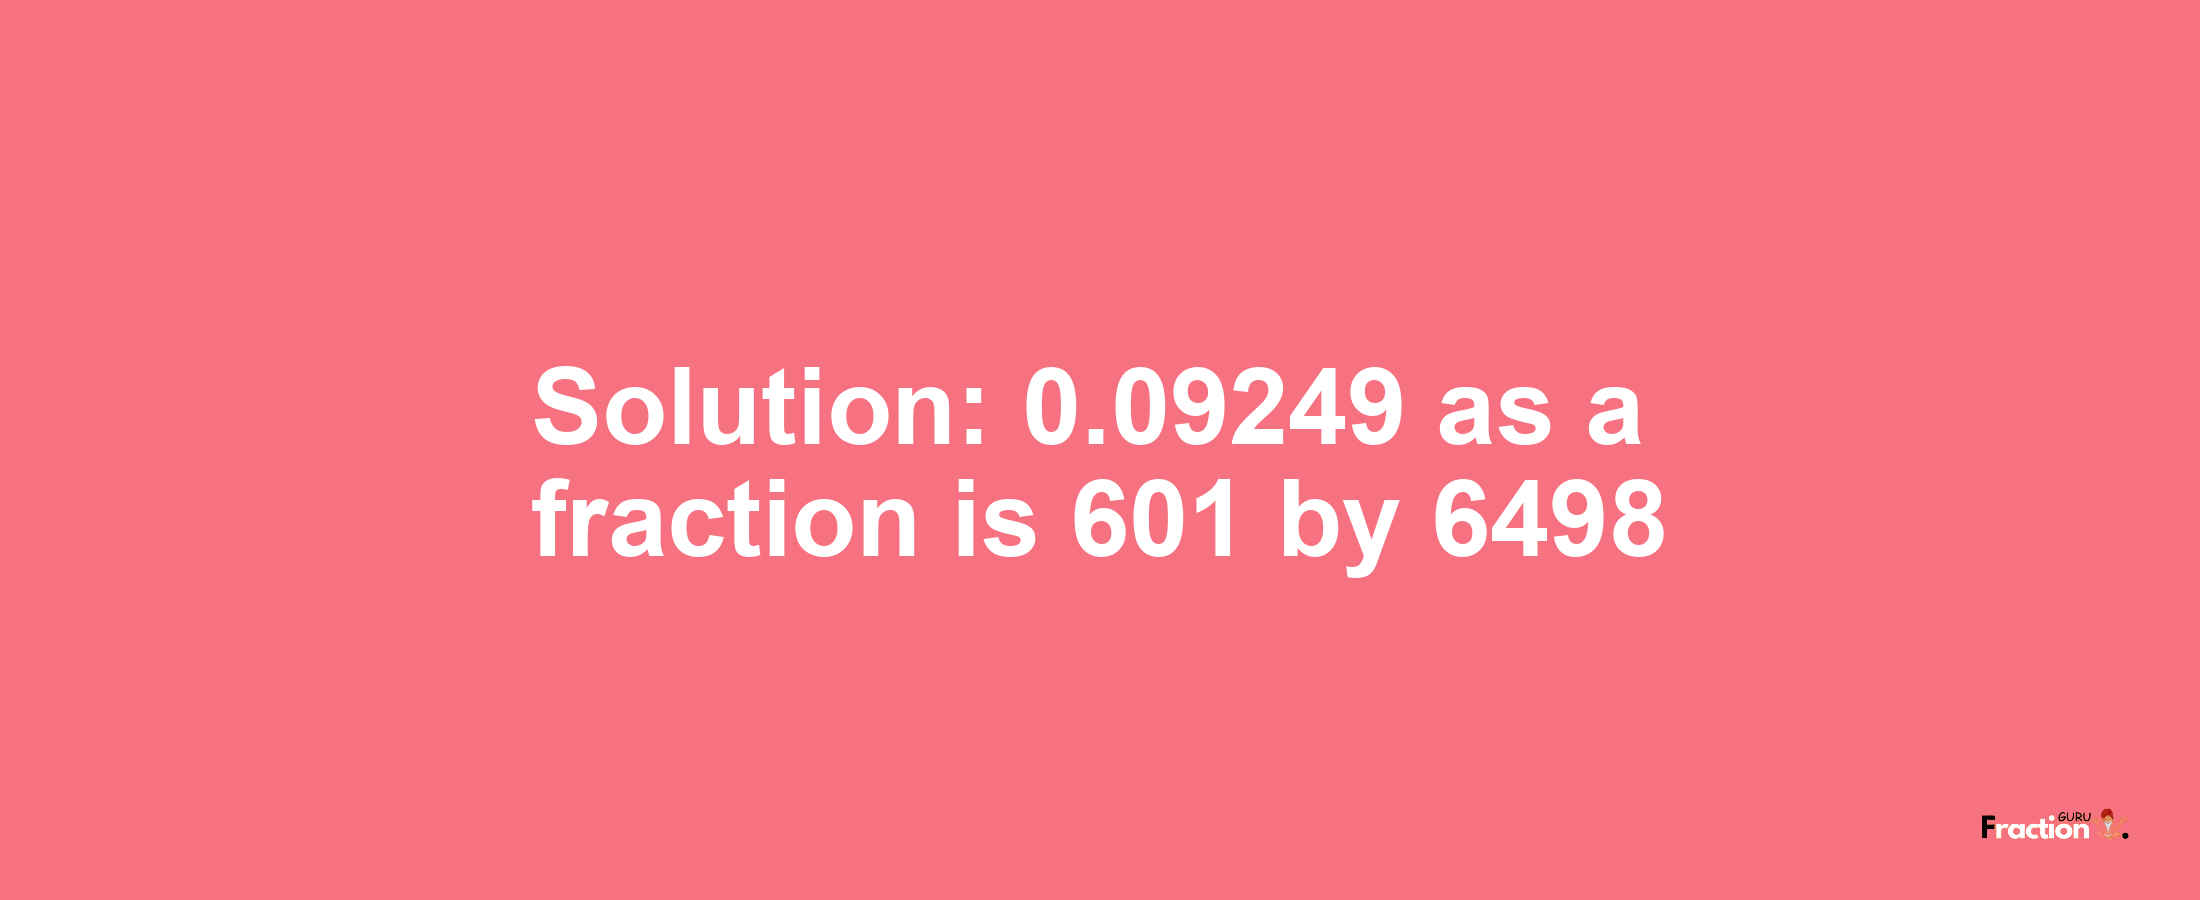 Solution:0.09249 as a fraction is 601/6498